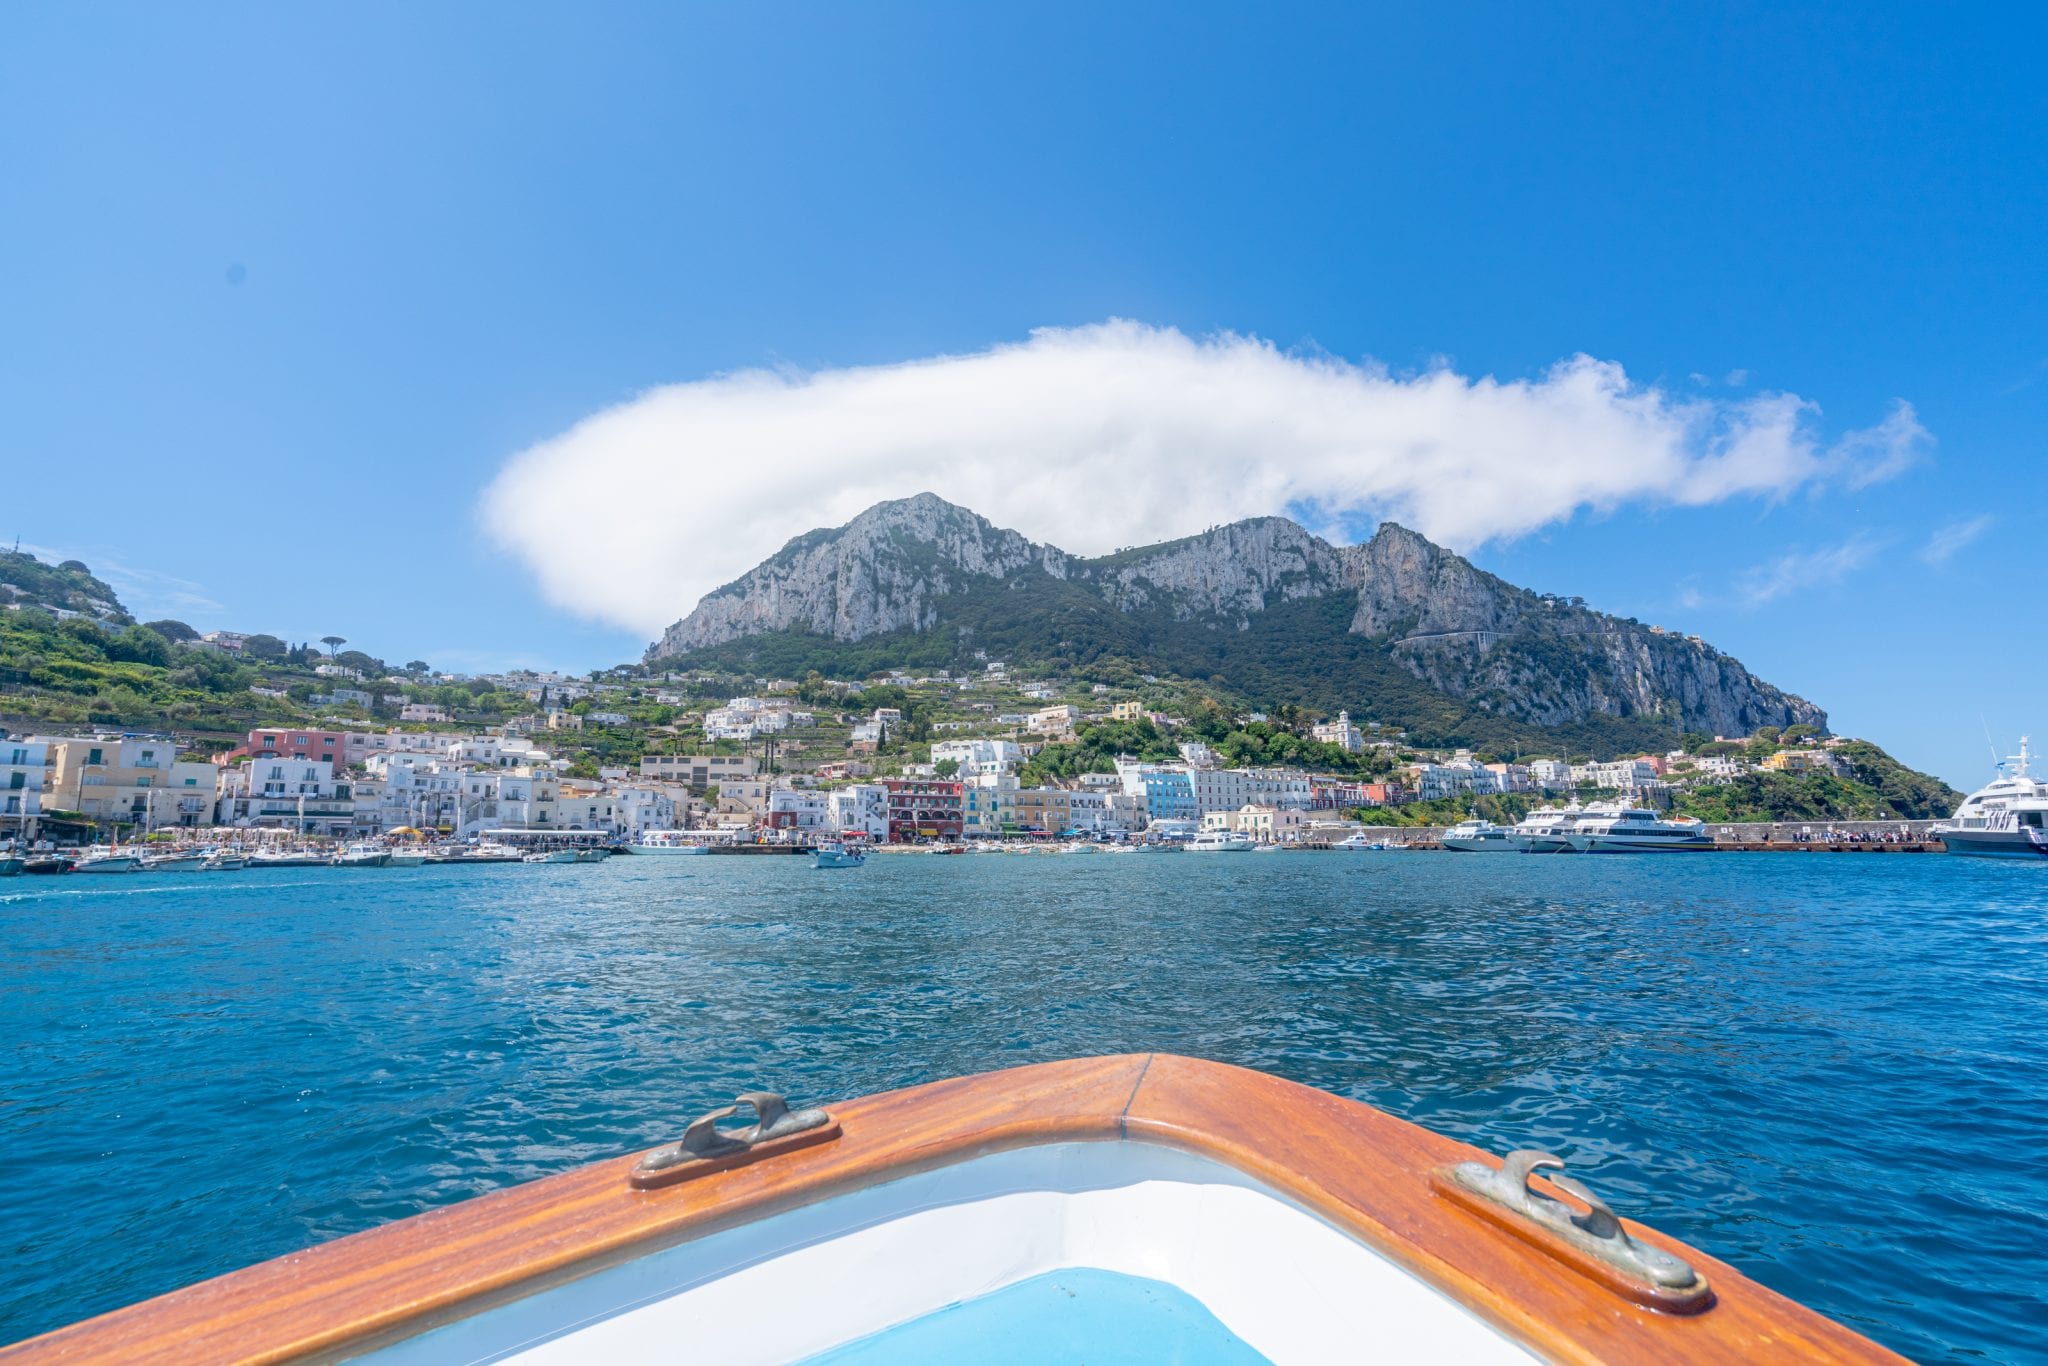 Mariana Grande, Capri, as seen from a boat, with bow of boat in the foreground.